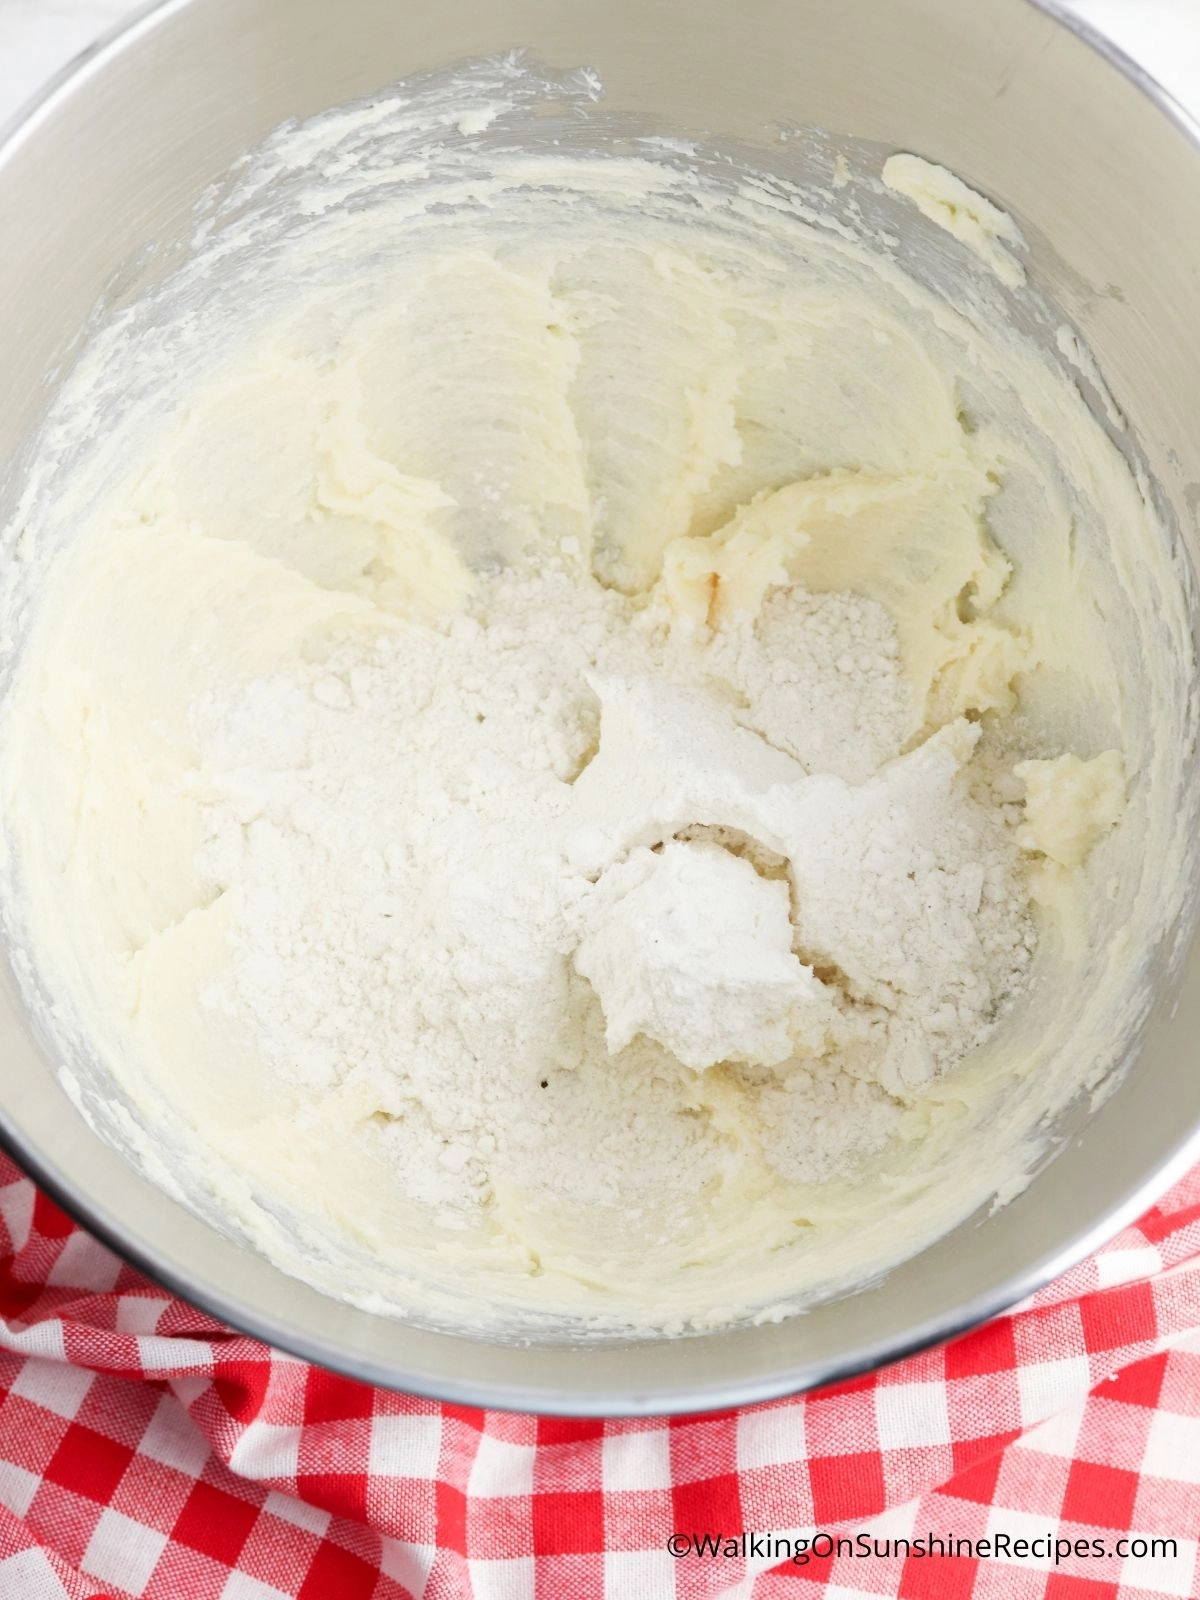 Butter combined with flour mixture.